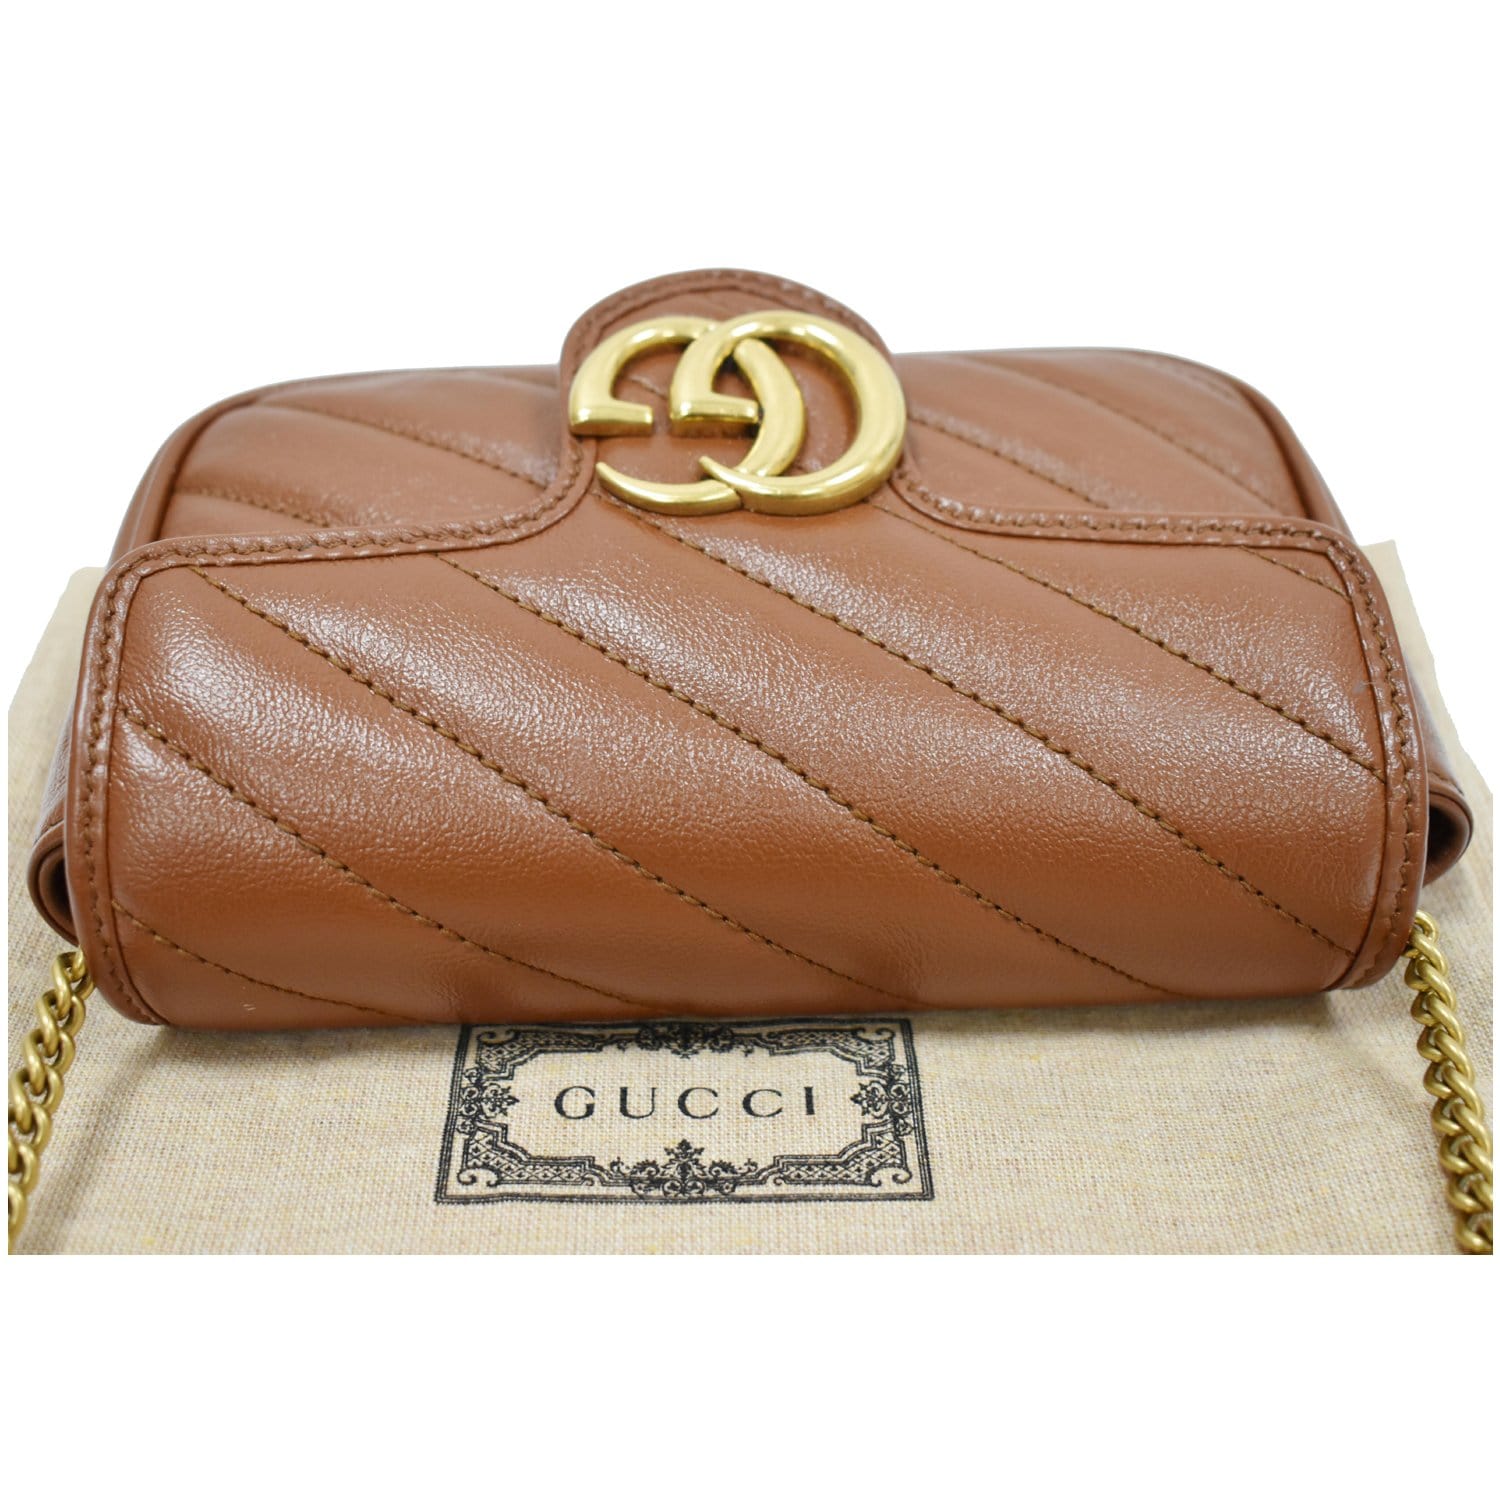 Gucci Bag. Authentic Gucci Vintage Monogram Camel / Tan and Brown Shoulder Bag. Italian Designer Purse from 70s